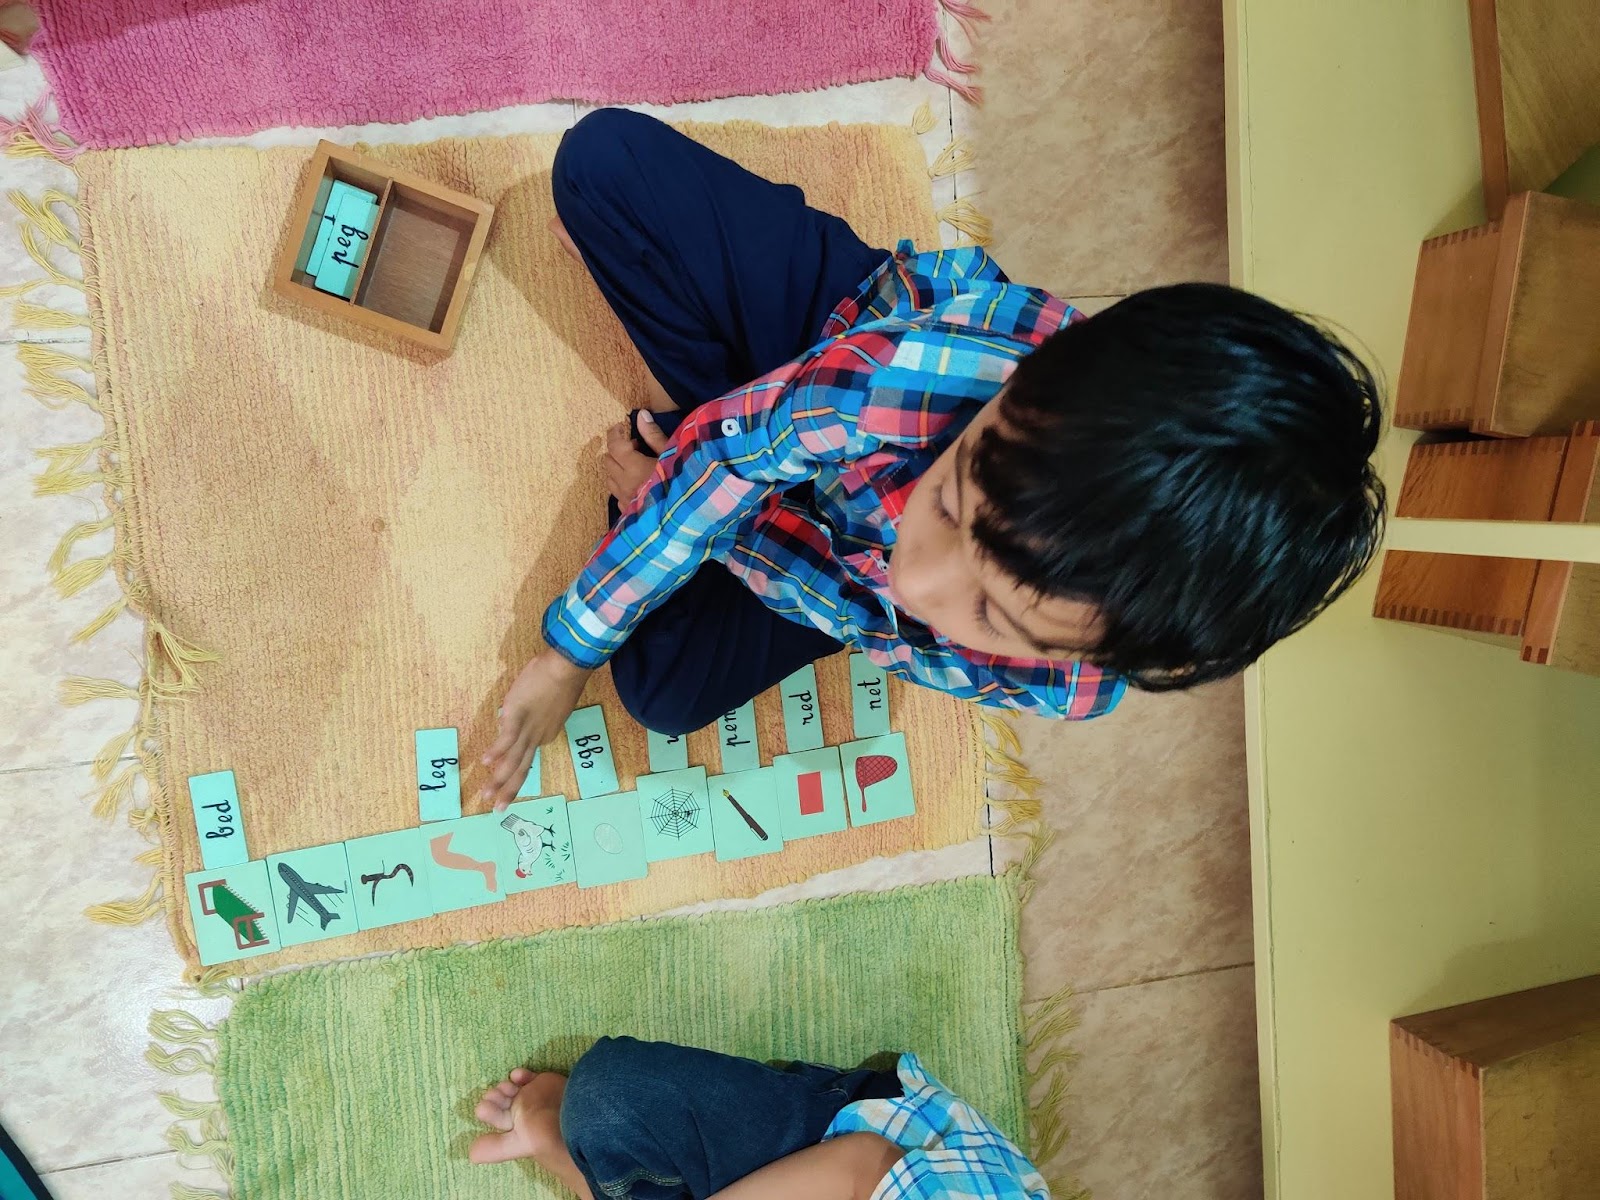 Child playing with images and words